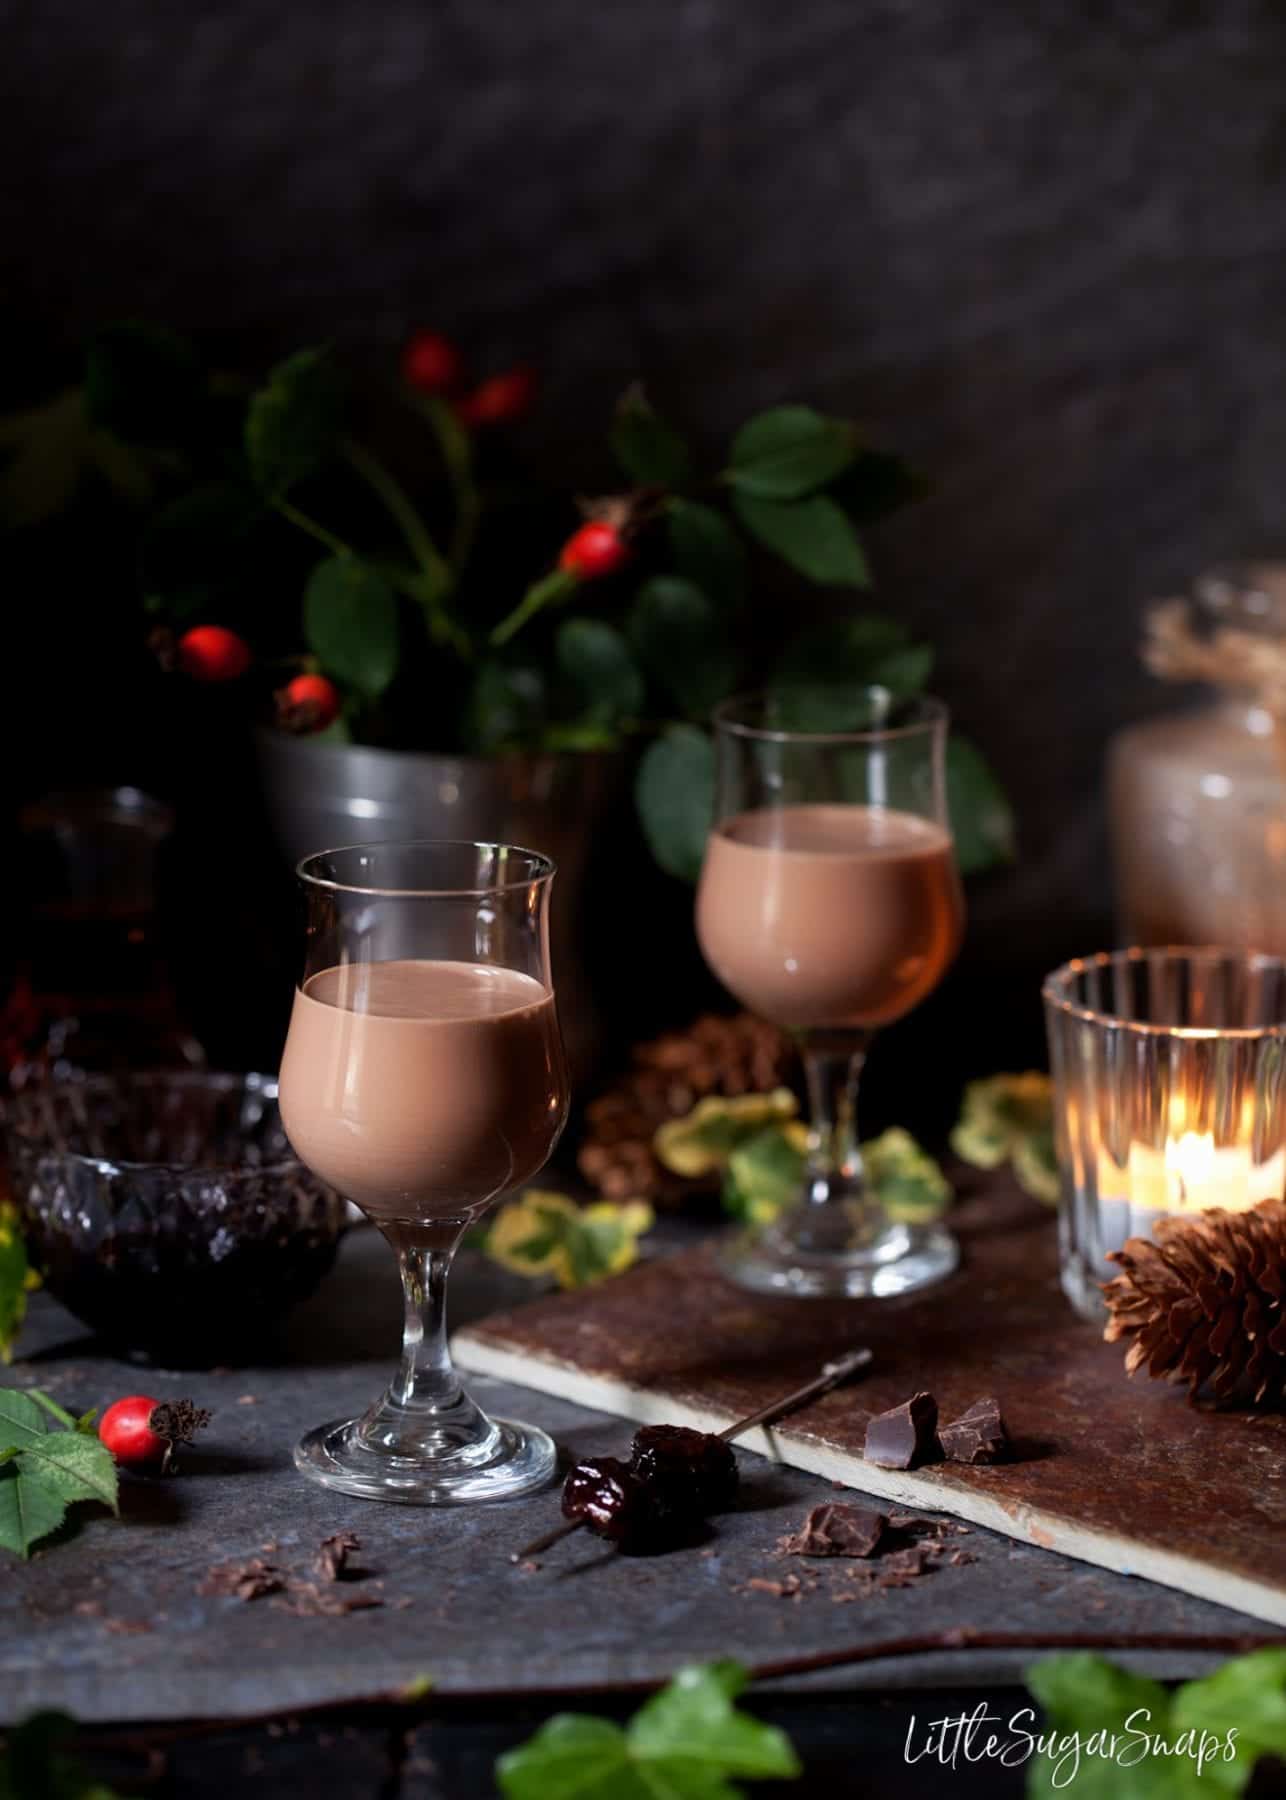 Two glasses filled with alcoholic chocolate cream liqueur drink.